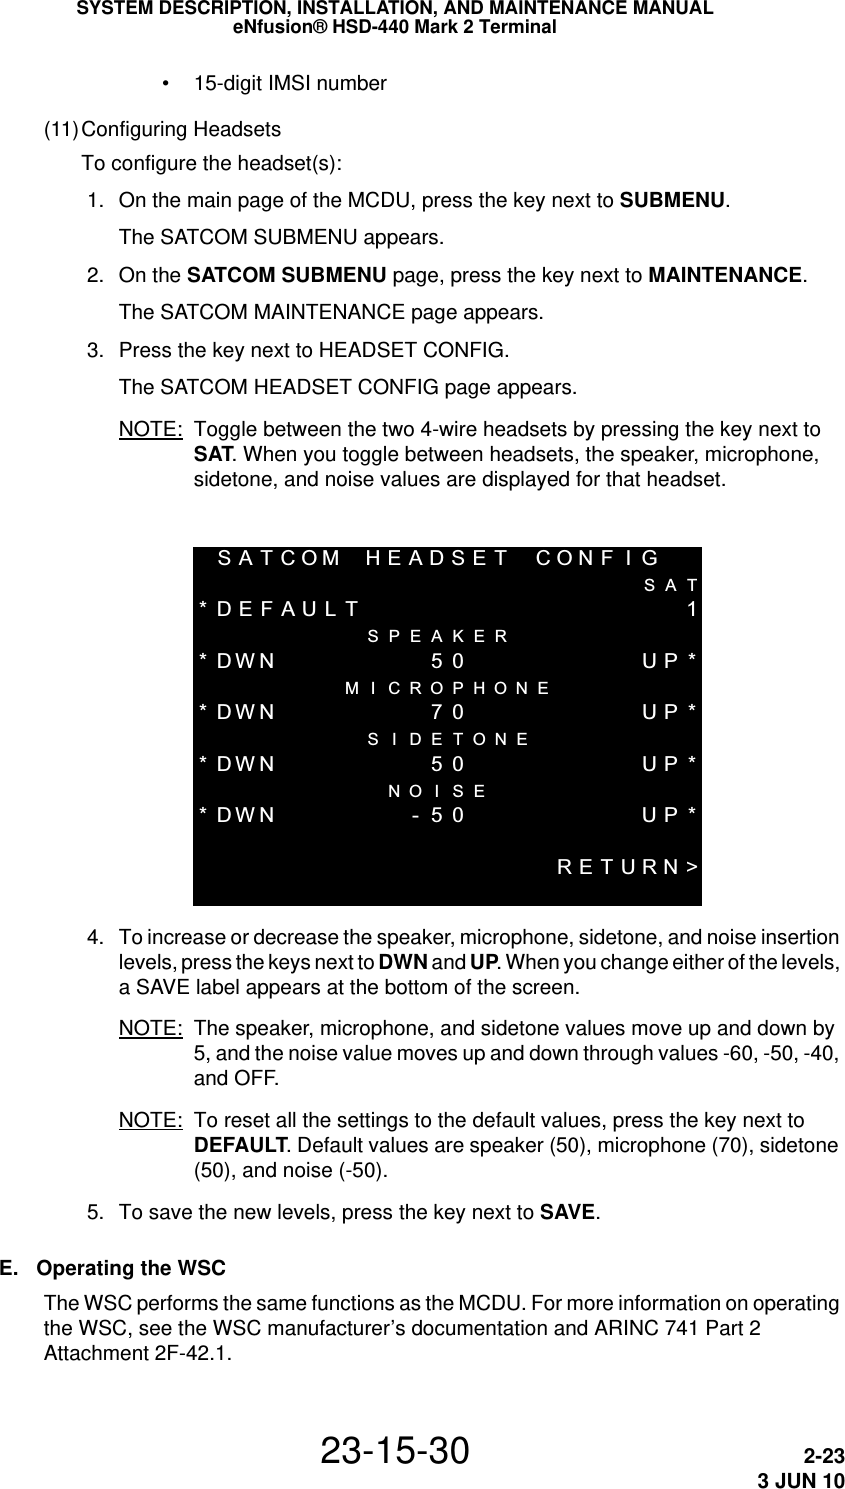 SYSTEM DESCRIPTION, INSTALLATION, AND MAINTENANCE MANUALeNfusion® HSD-440 Mark 2 Terminal23-15-30 2-233 JUN 10 • 15-digit IMSI number(11)Configuring HeadsetsTo configure the headset(s): 1. On the main page of the MCDU, press the key next to SUBMENU.The SATCOM SUBMENU appears. 2. On the SATCOM SUBMENU page, press the key next to MAINTENANCE.The SATCOM MAINTENANCE page appears.  3. Press the key next to HEADSET CONFIG.The SATCOM HEADSET CONFIG page appears. NOTE: Toggle between the two 4-wire headsets by pressing the key next to SAT. When you toggle between headsets, the speaker, microphone, sidetone, and noise values are displayed for that headset.SATCOMHEADSET CONF I GSAT*DEFAULT 1 SPEAKER*DWN50 UP* M I CROPHONE*DWN 70 UP*S I DETONE*DWN50 UP* NO I SE*DWN-50 UP*RETURN&gt; 4. To increase or decrease the speaker, microphone, sidetone, and noise insertion levels, press the keys next to DWN and UP. When you change either of the levels, a SAVE label appears at the bottom of the screen.NOTE: The speaker, microphone, and sidetone values move up and down by 5, and the noise value moves up and down through values -60, -50, -40, and OFF.NOTE: To reset all the settings to the default values, press the key next to DEFAULT. Default values are speaker (50), microphone (70), sidetone (50), and noise (-50). 5. To save the new levels, press the key next to SAVE.E. Operating the WSCThe WSC performs the same functions as the MCDU. For more information on operating the WSC, see the WSC manufacturer’s documentation and ARINC 741 Part 2 Attachment 2F-42.1.